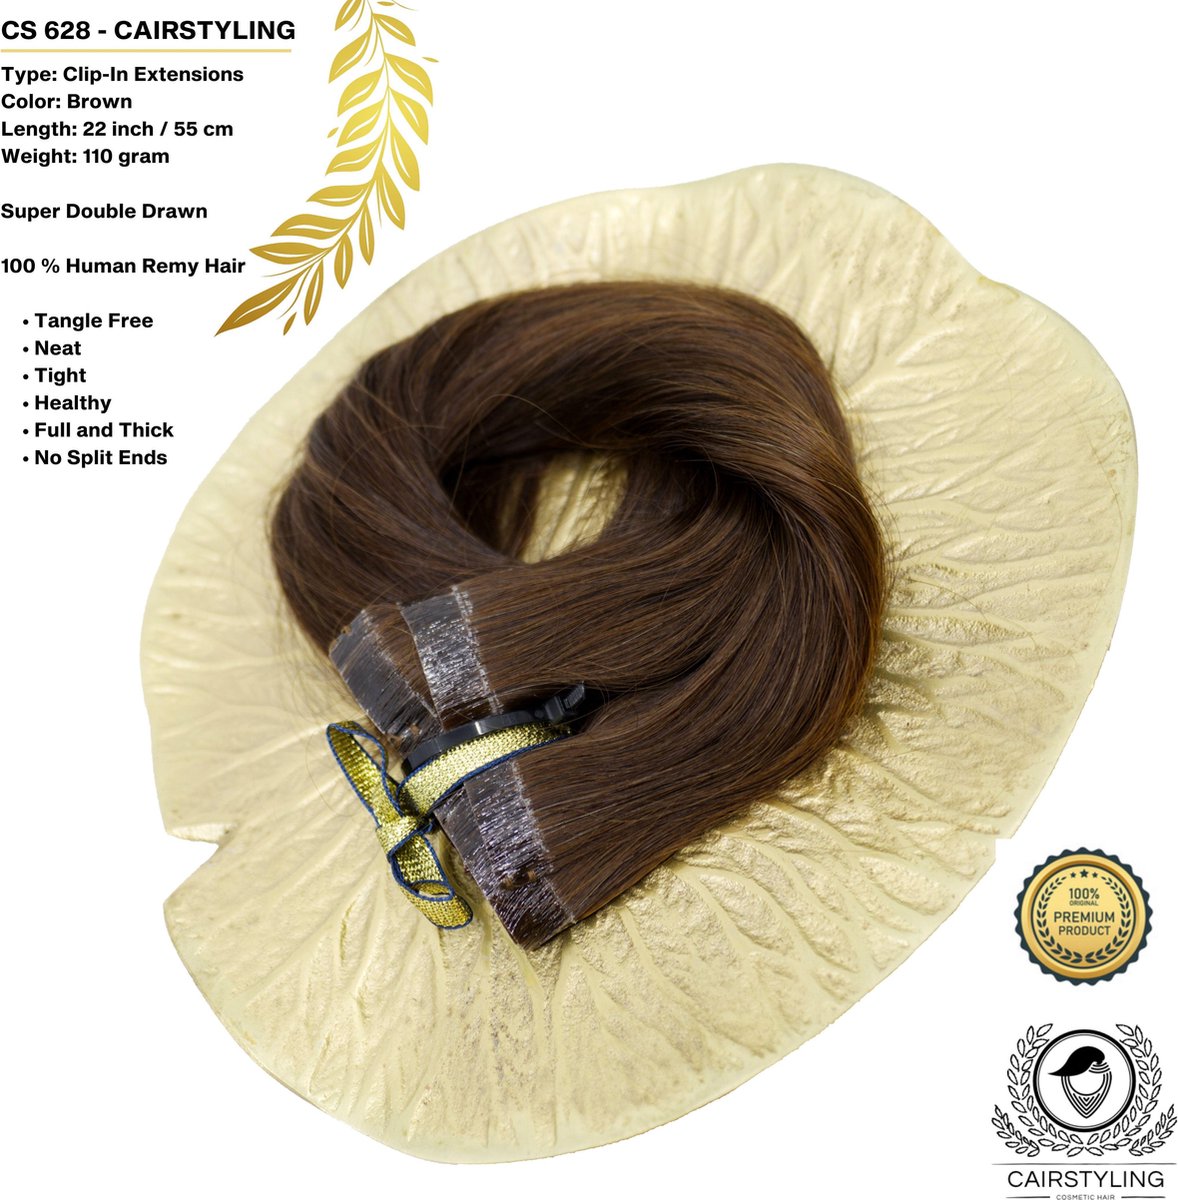 CAIRSTYLING Premium 100% Human Hair - CS628 INVISIBLE CLIP-IN - Super Double Remy Human Hair Extensions | 115 Gram | 55 CM (22 inch) | Haarverlenging | Best Quality Hair Long-term Use | 2022 Trending Invisible Laces | Brown Natural